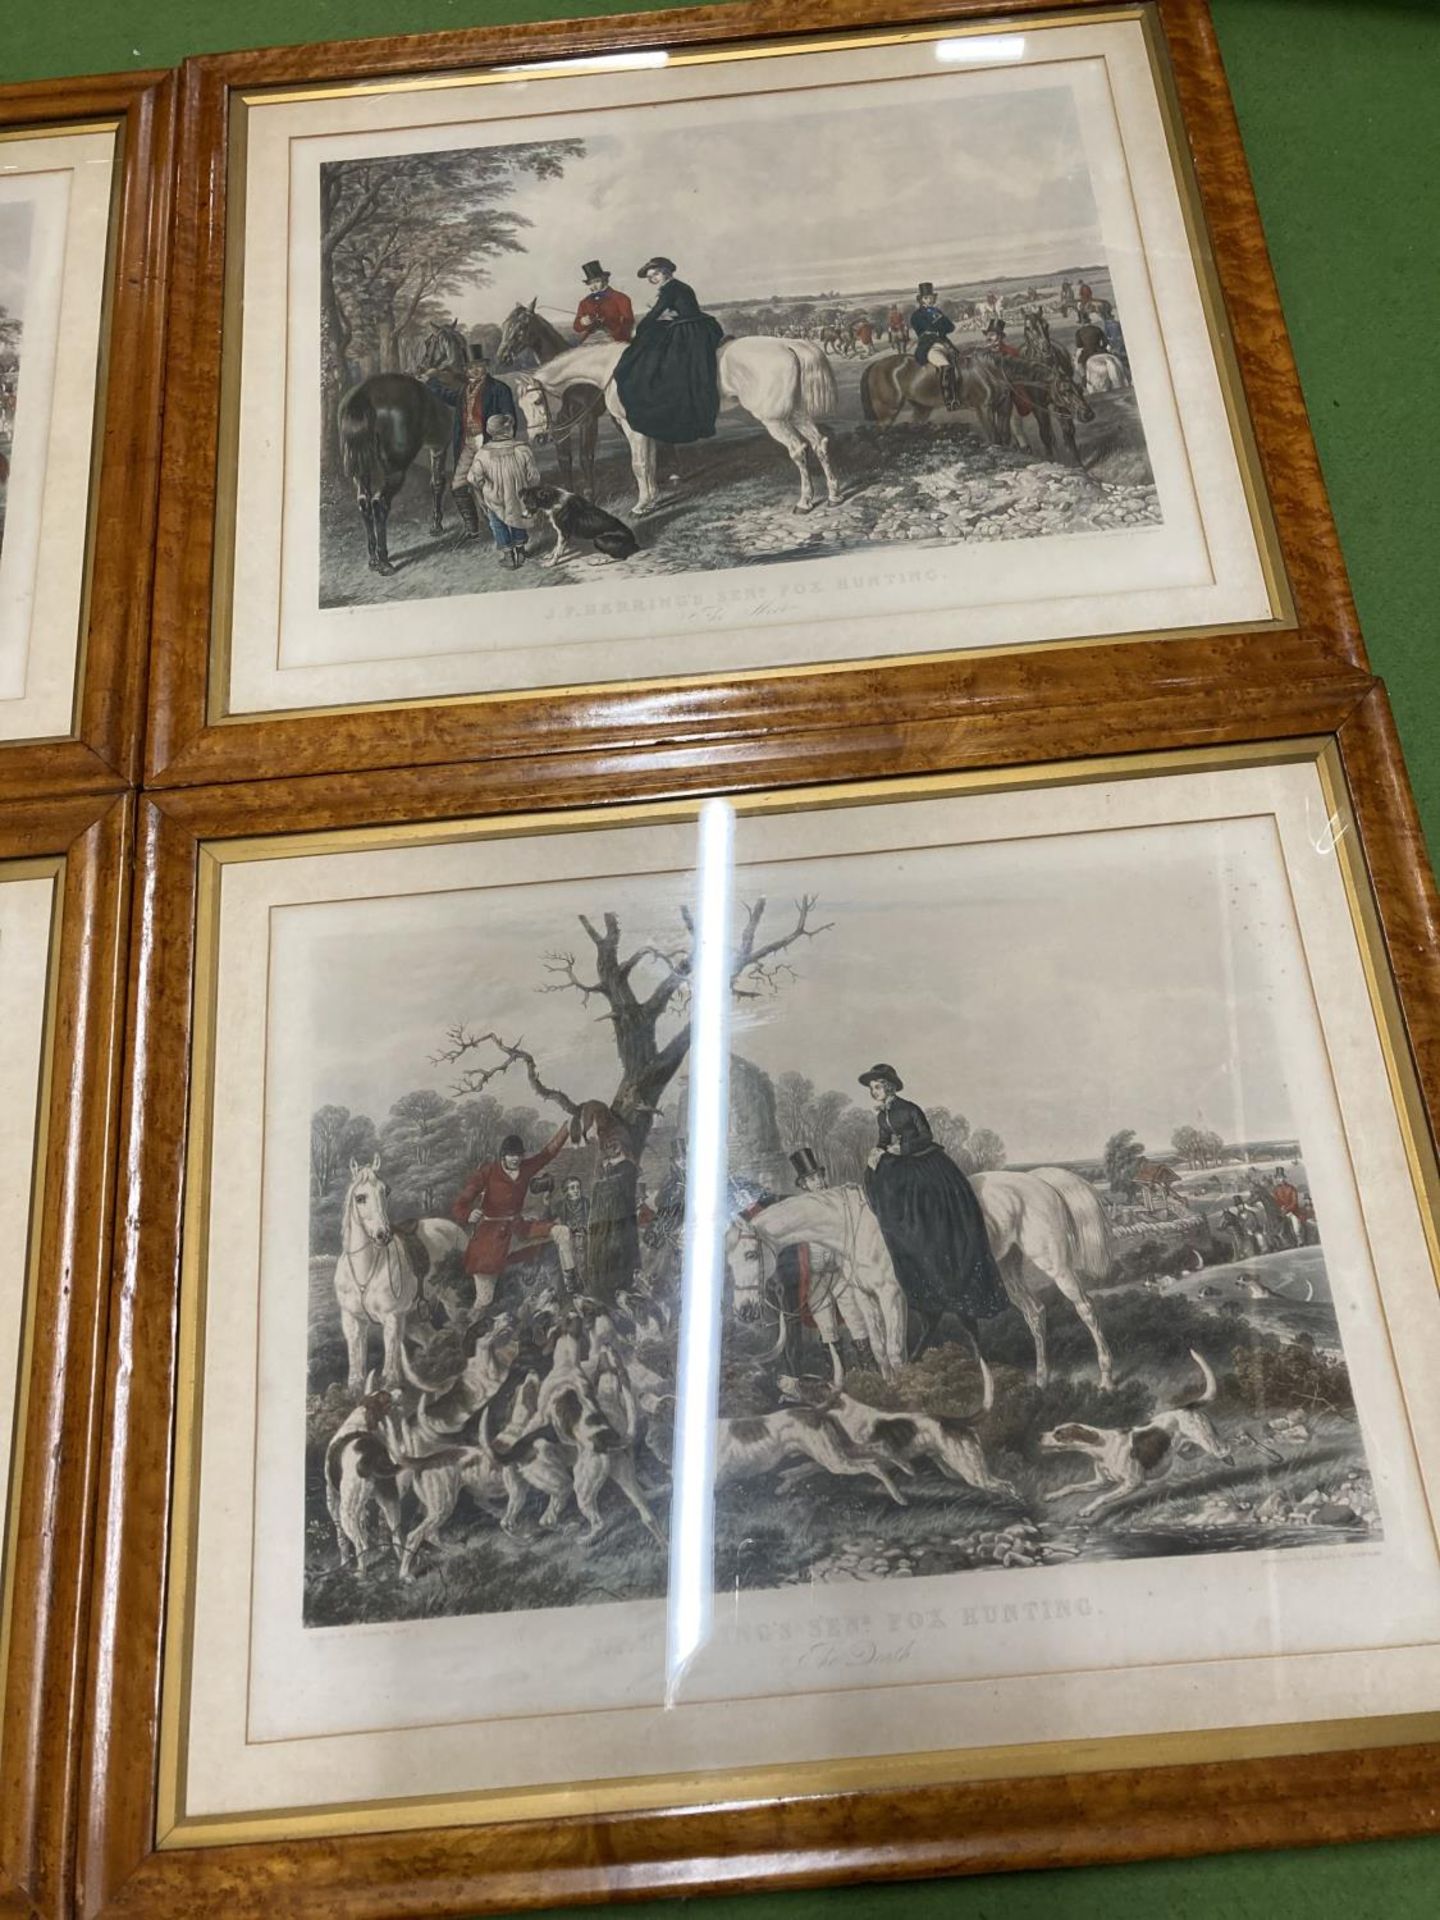 A SET OF FOUR WALNUT FRAMED HUNTING ENGRAVINGS BY J.P HERRING AND ENGRAVED BY J.HARRIS & C. QUENTERY - Image 3 of 3